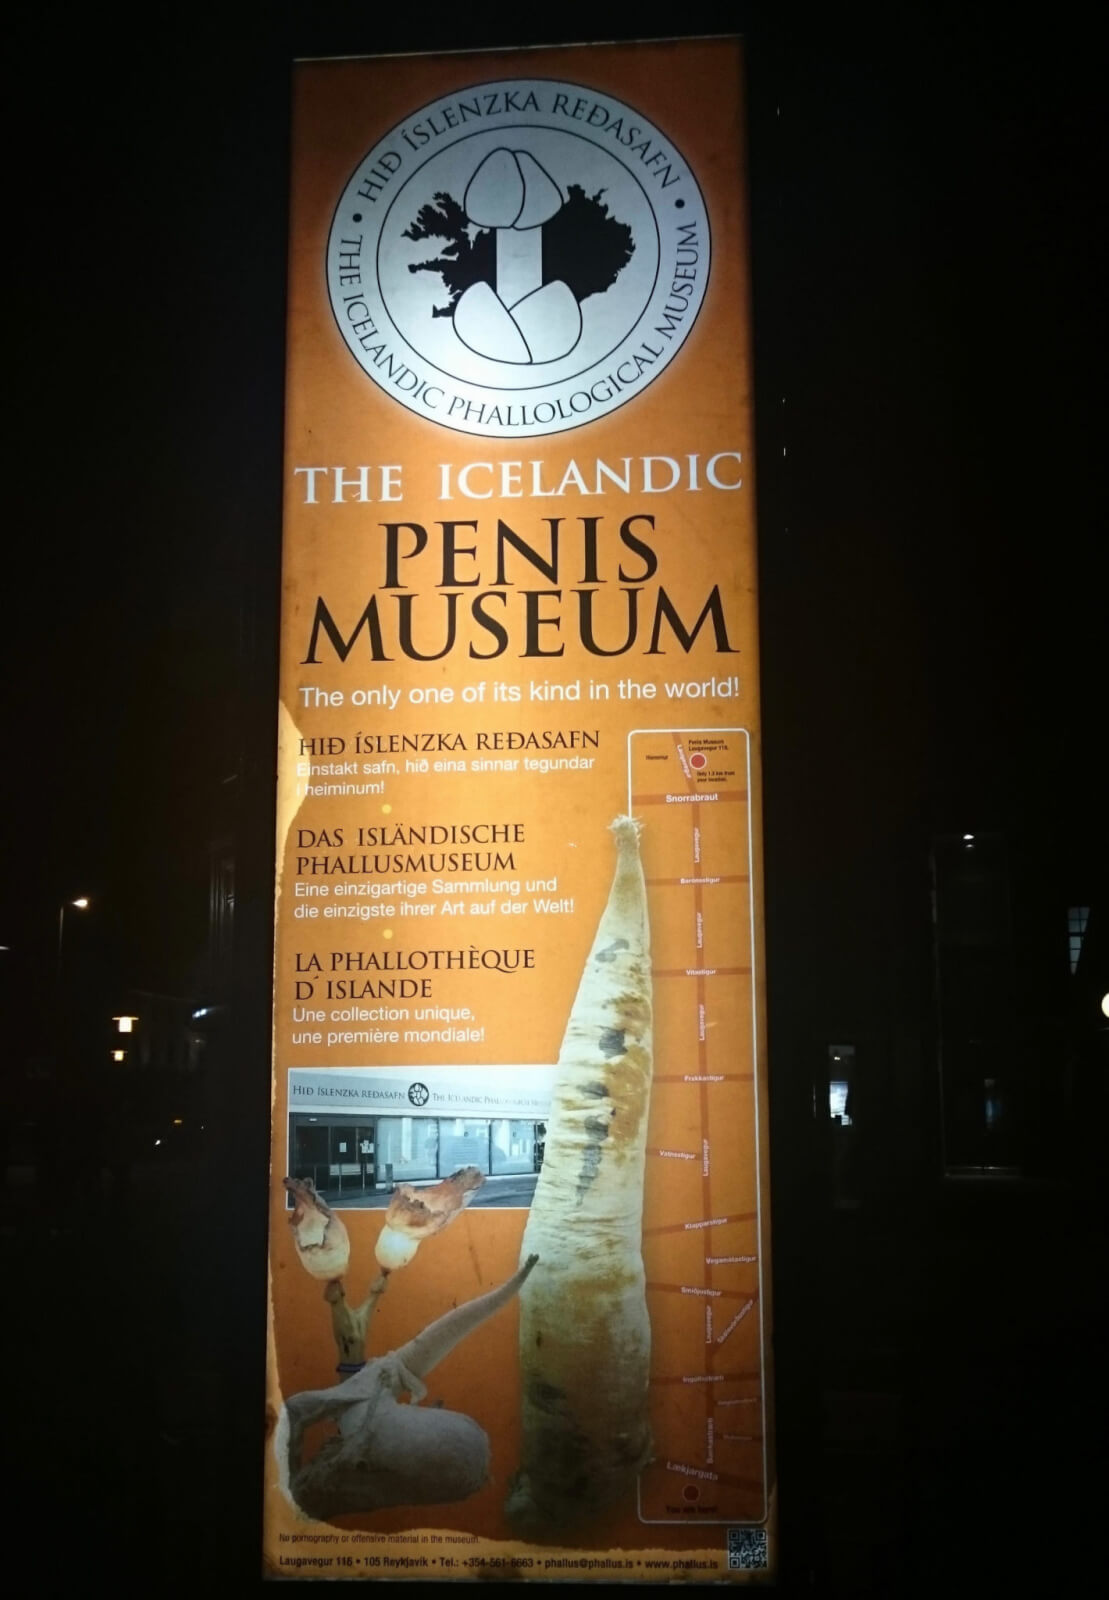 An illuminated sign for the Icelandic Penis Museum